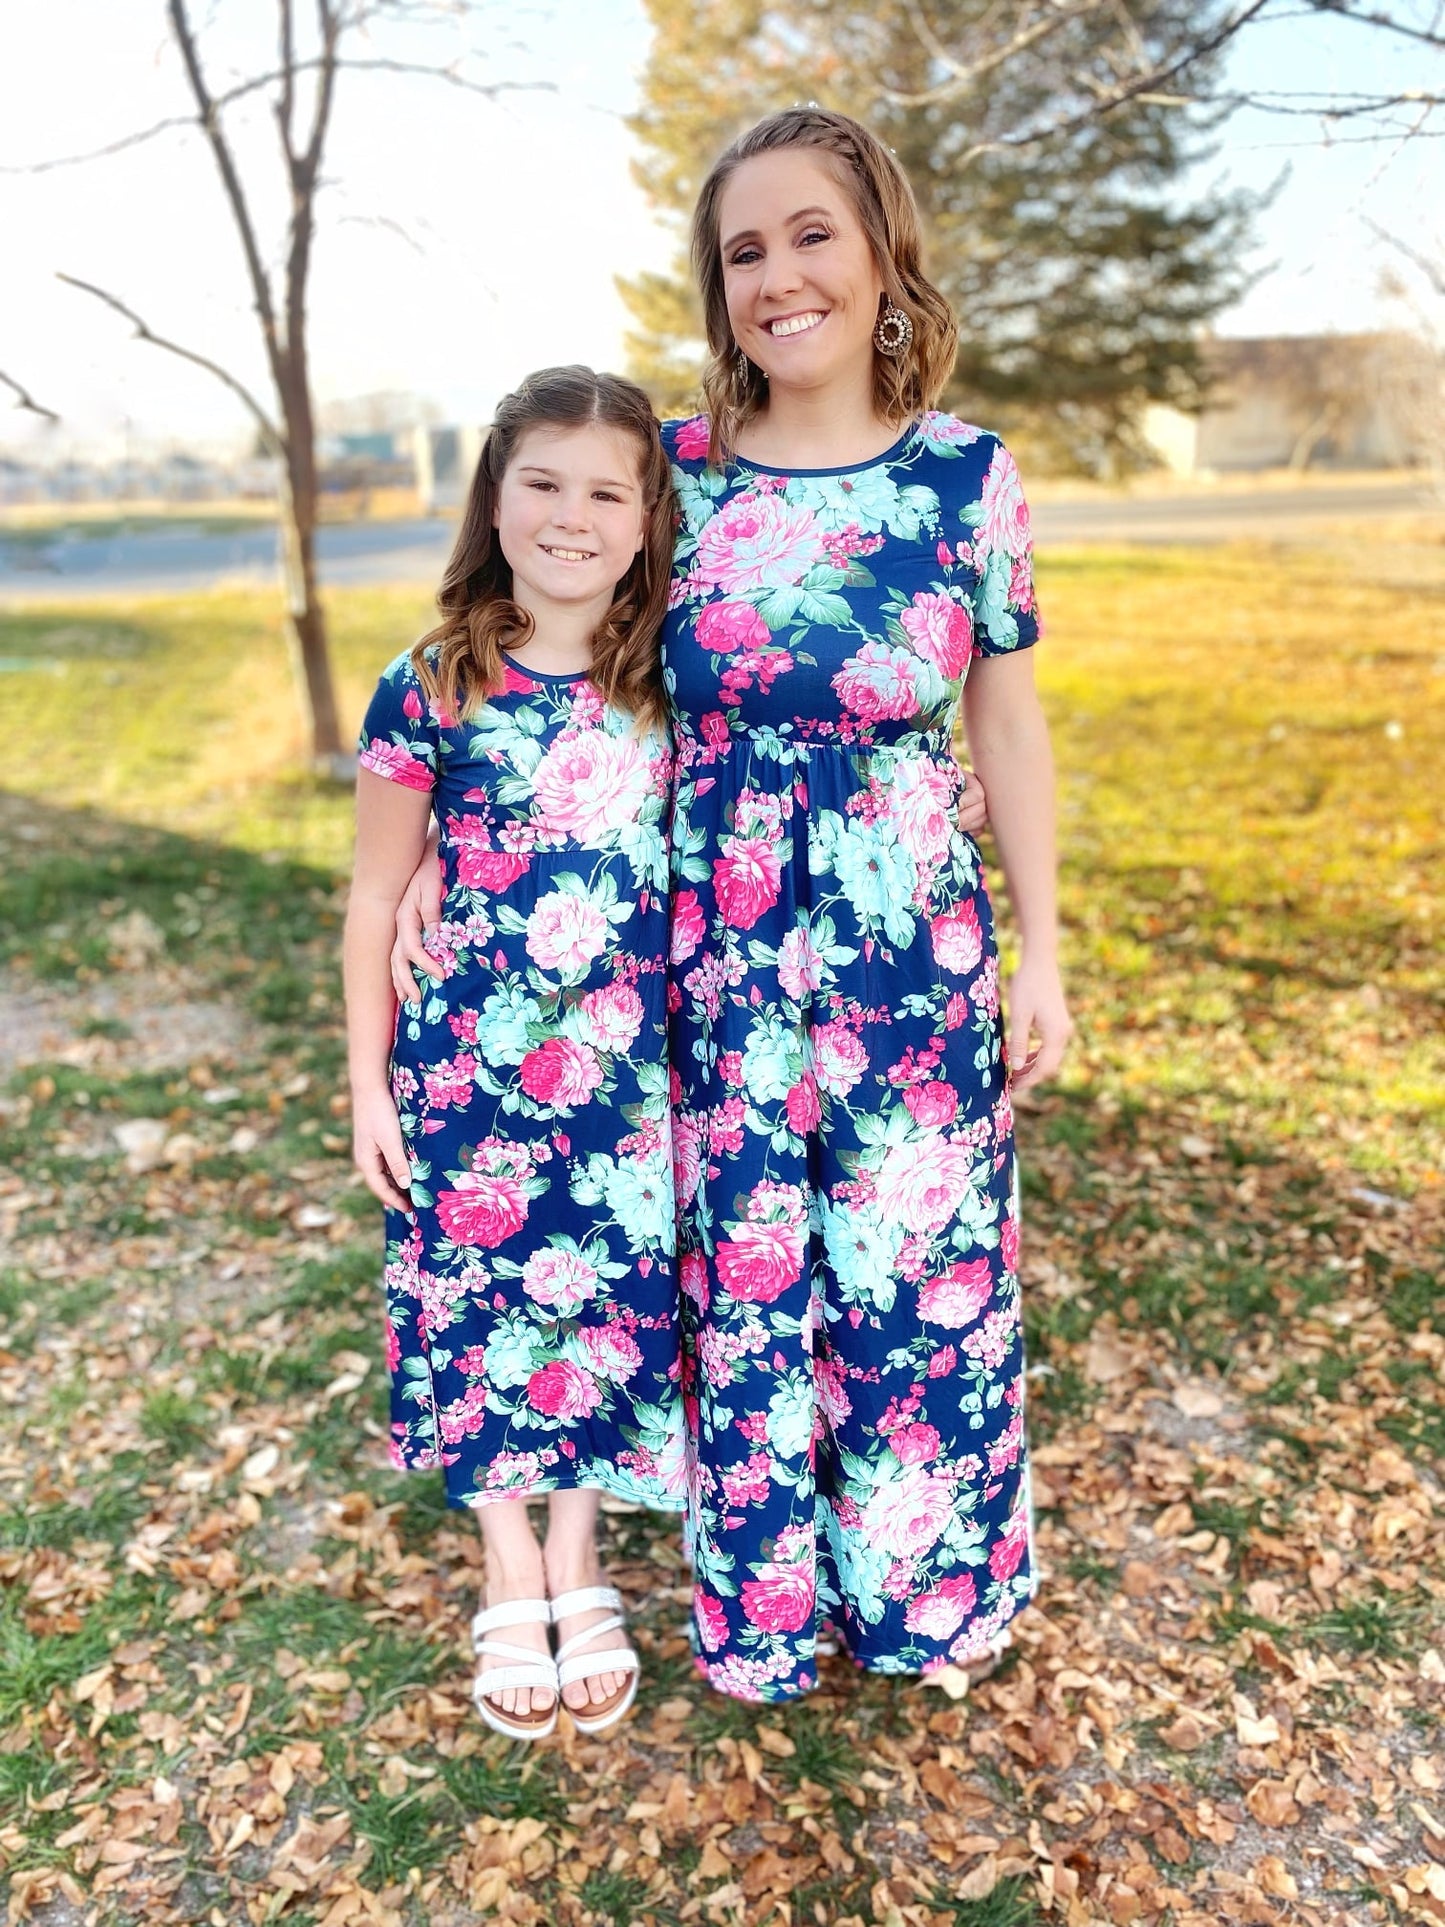 PREORDER: Matching Children's Clarissa Maxi Dress in Four Colors